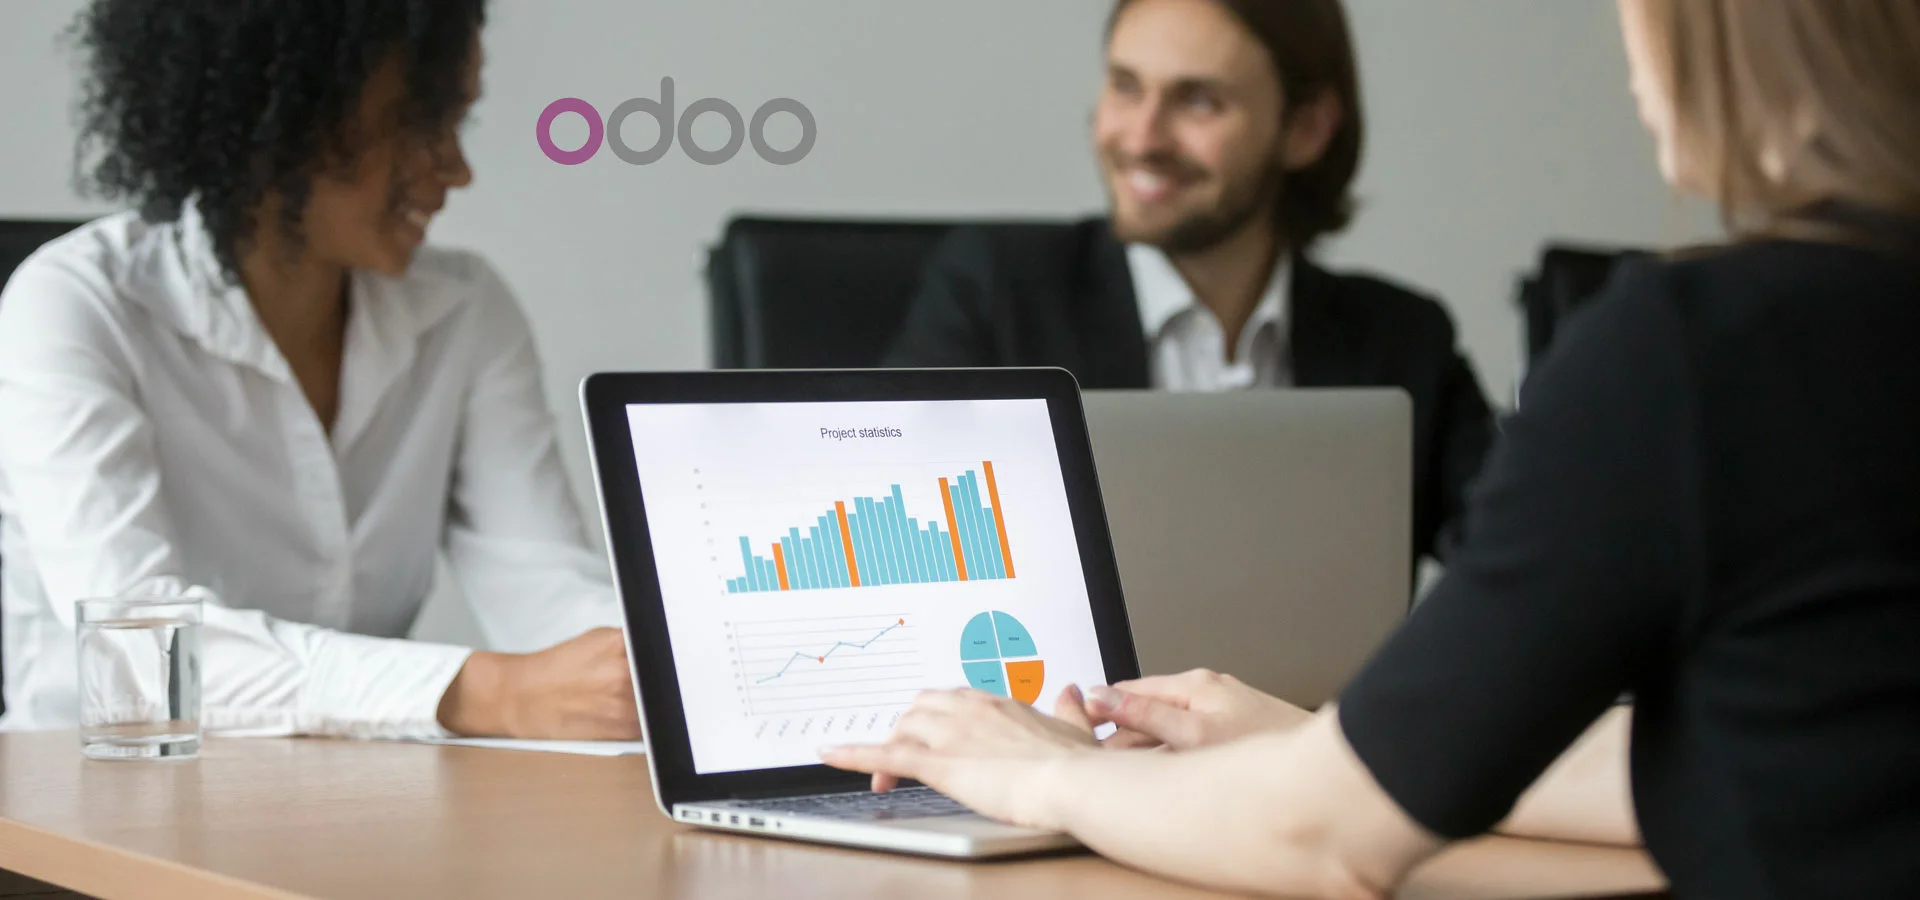 odoo-erp-support-and-services-related-blog-37